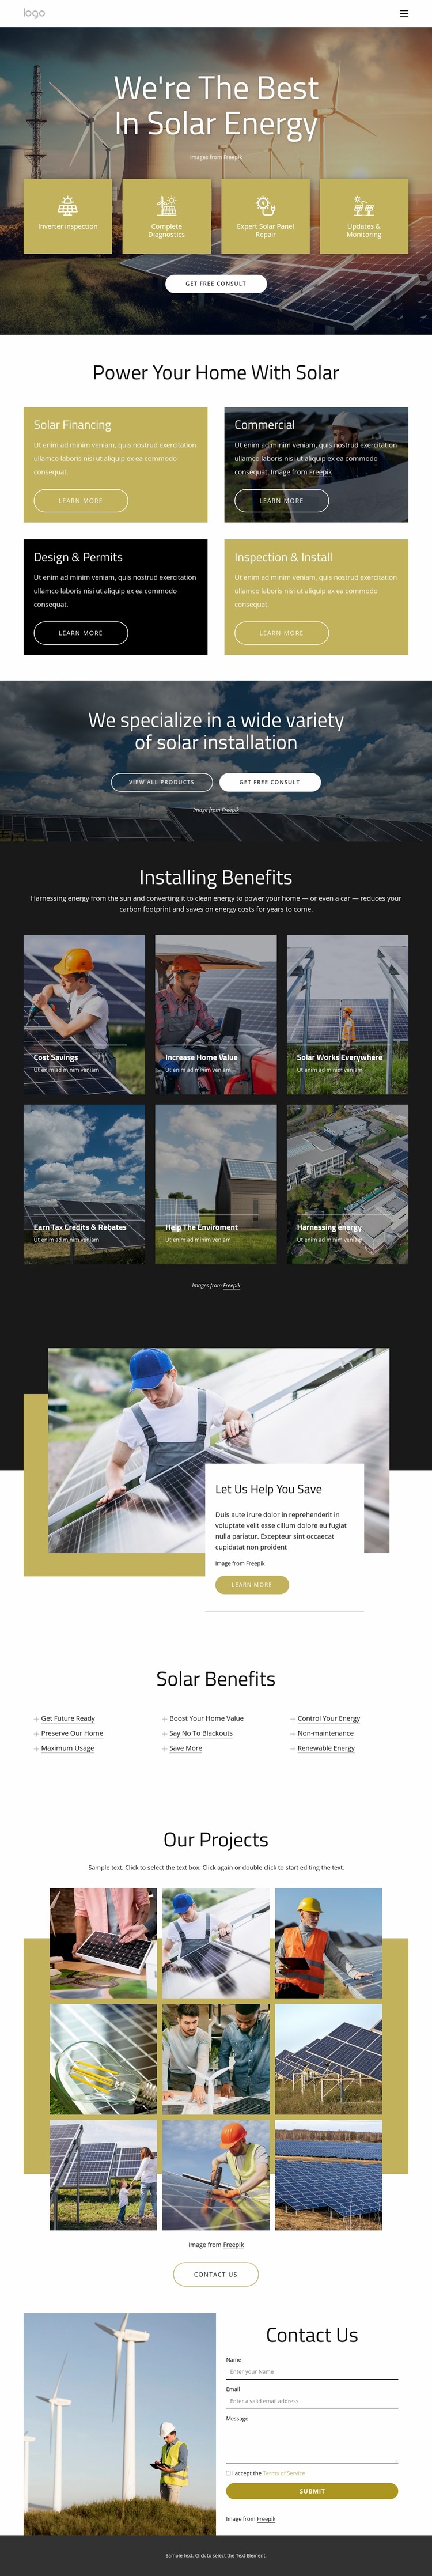 We are the best in solar energy Website Mockup